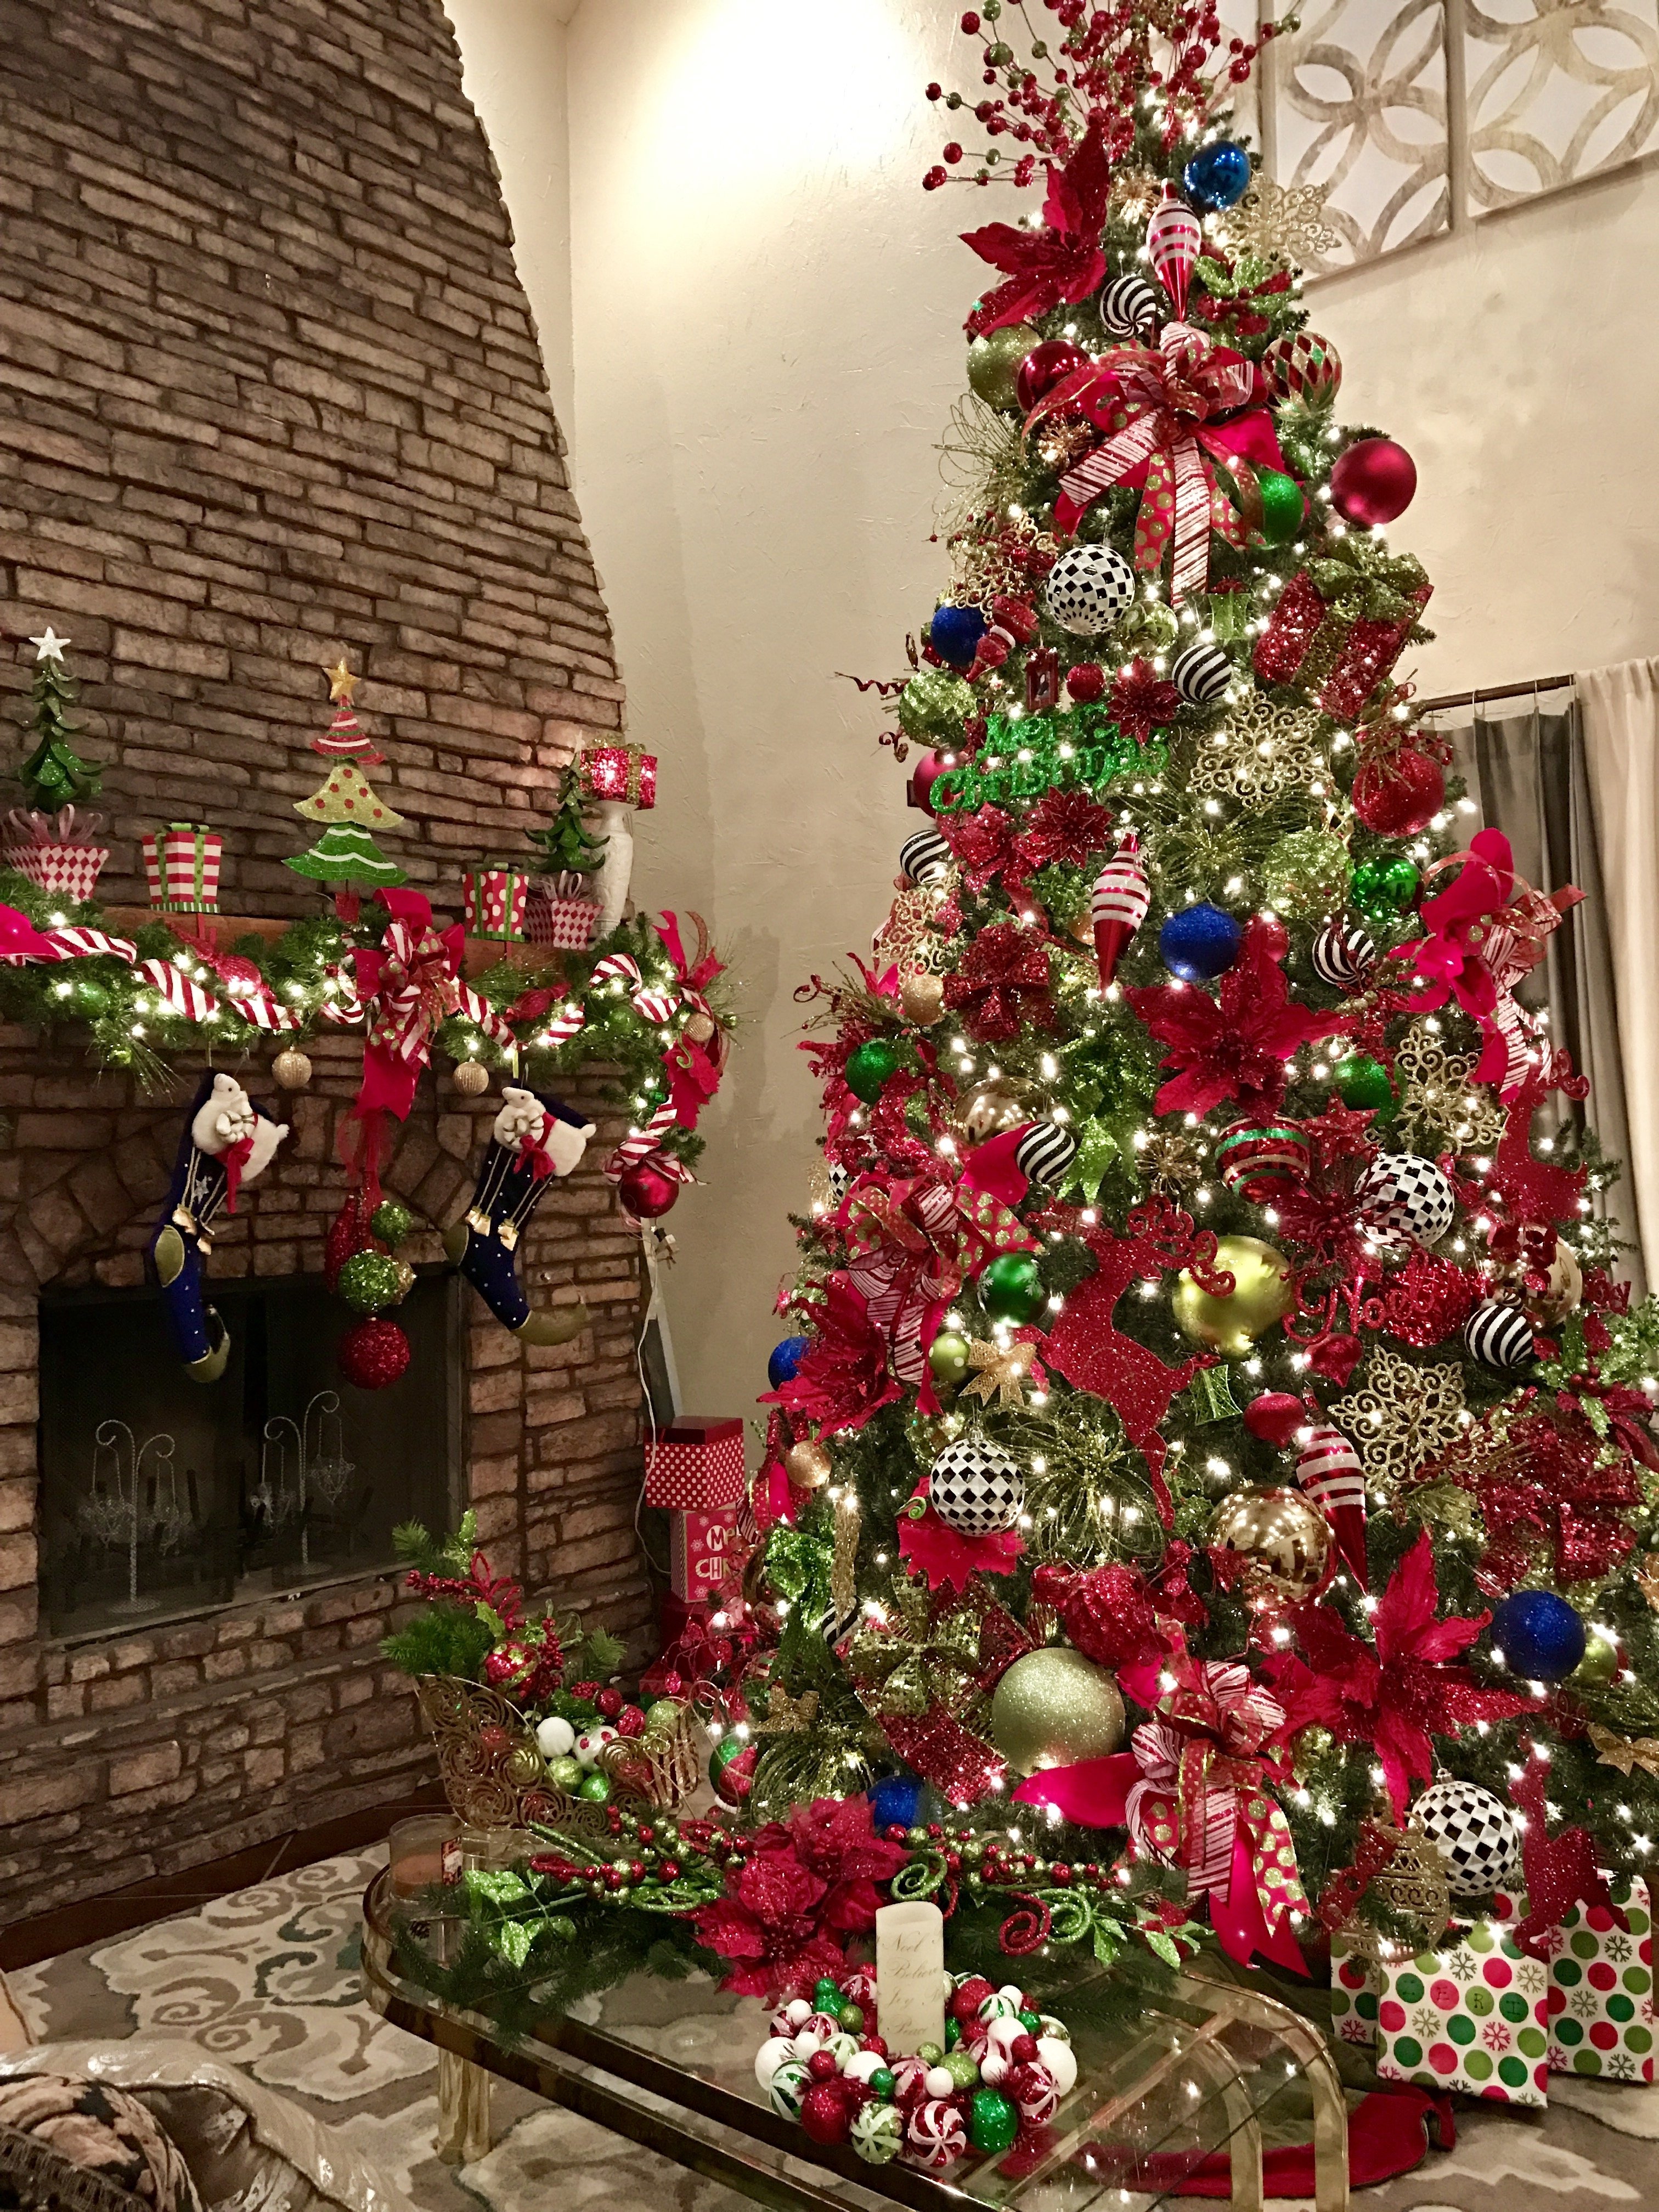 10 Stunning Red Green And Gold Christmas Tree Ideas my red green gold black and white 12ft 14ft christmas tree red and 2022